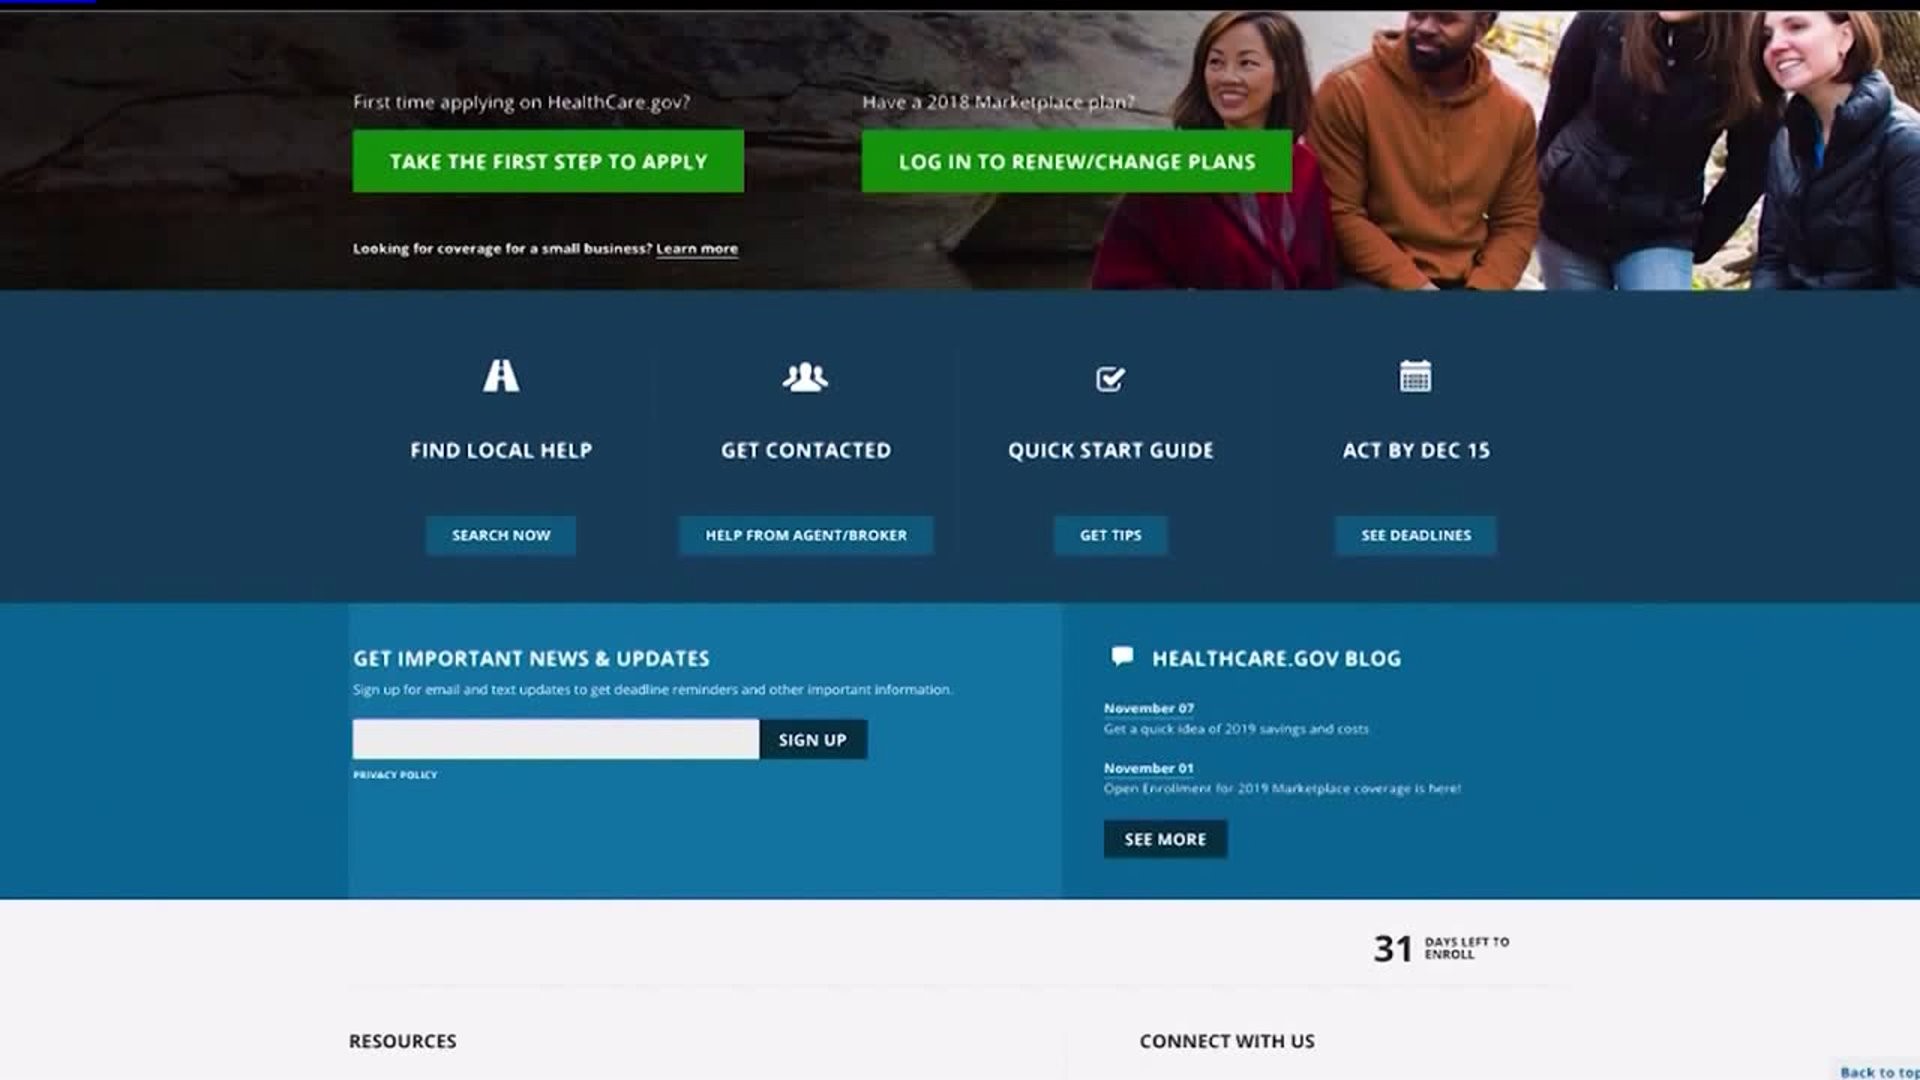 You can now enroll for Obamacare through December 15